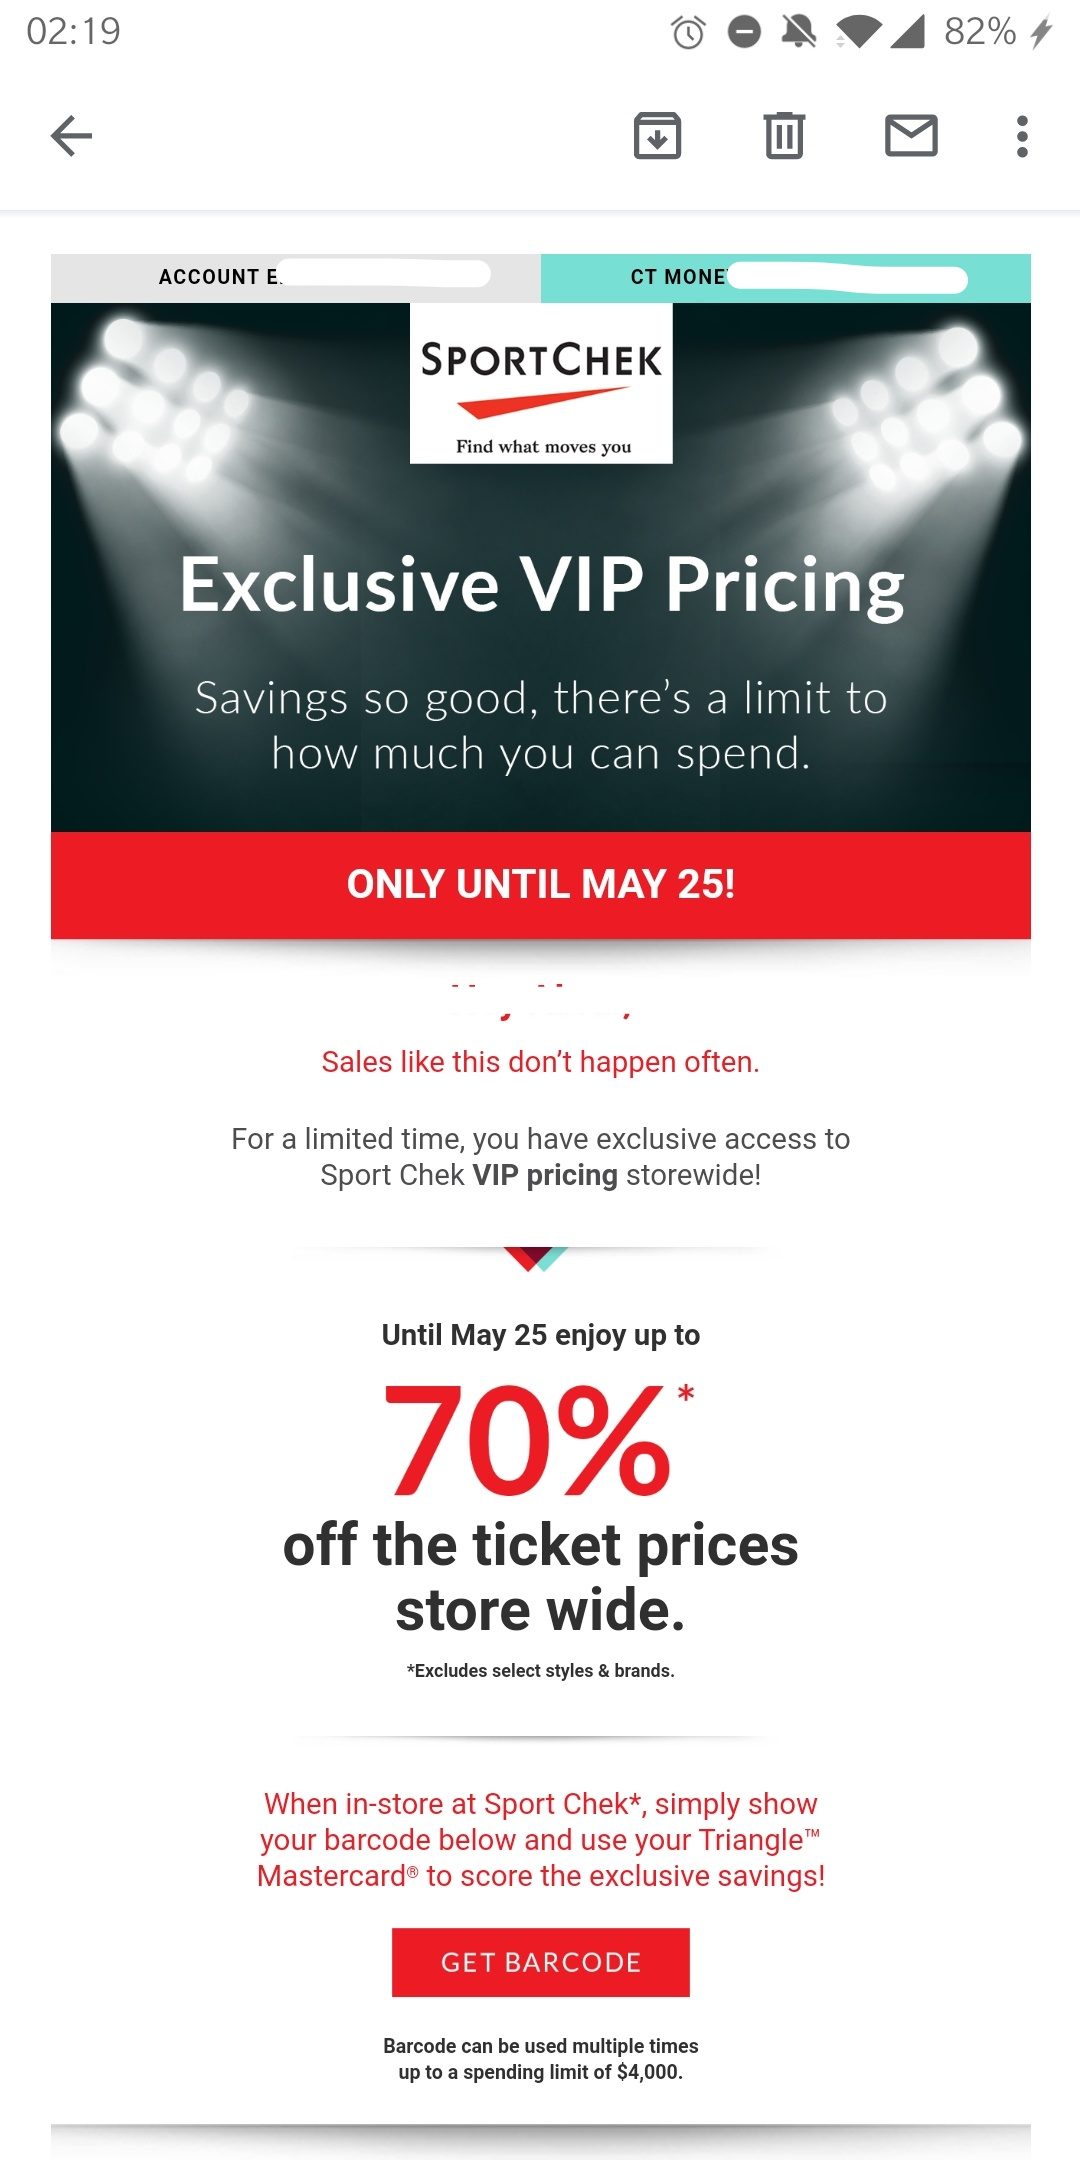 Sport Chek] VIP pricing up to 70% off, $4000 max per code (IN STORE ONLY,  Do not ask for codes, read OP) - RedFlagDeals.com Forums